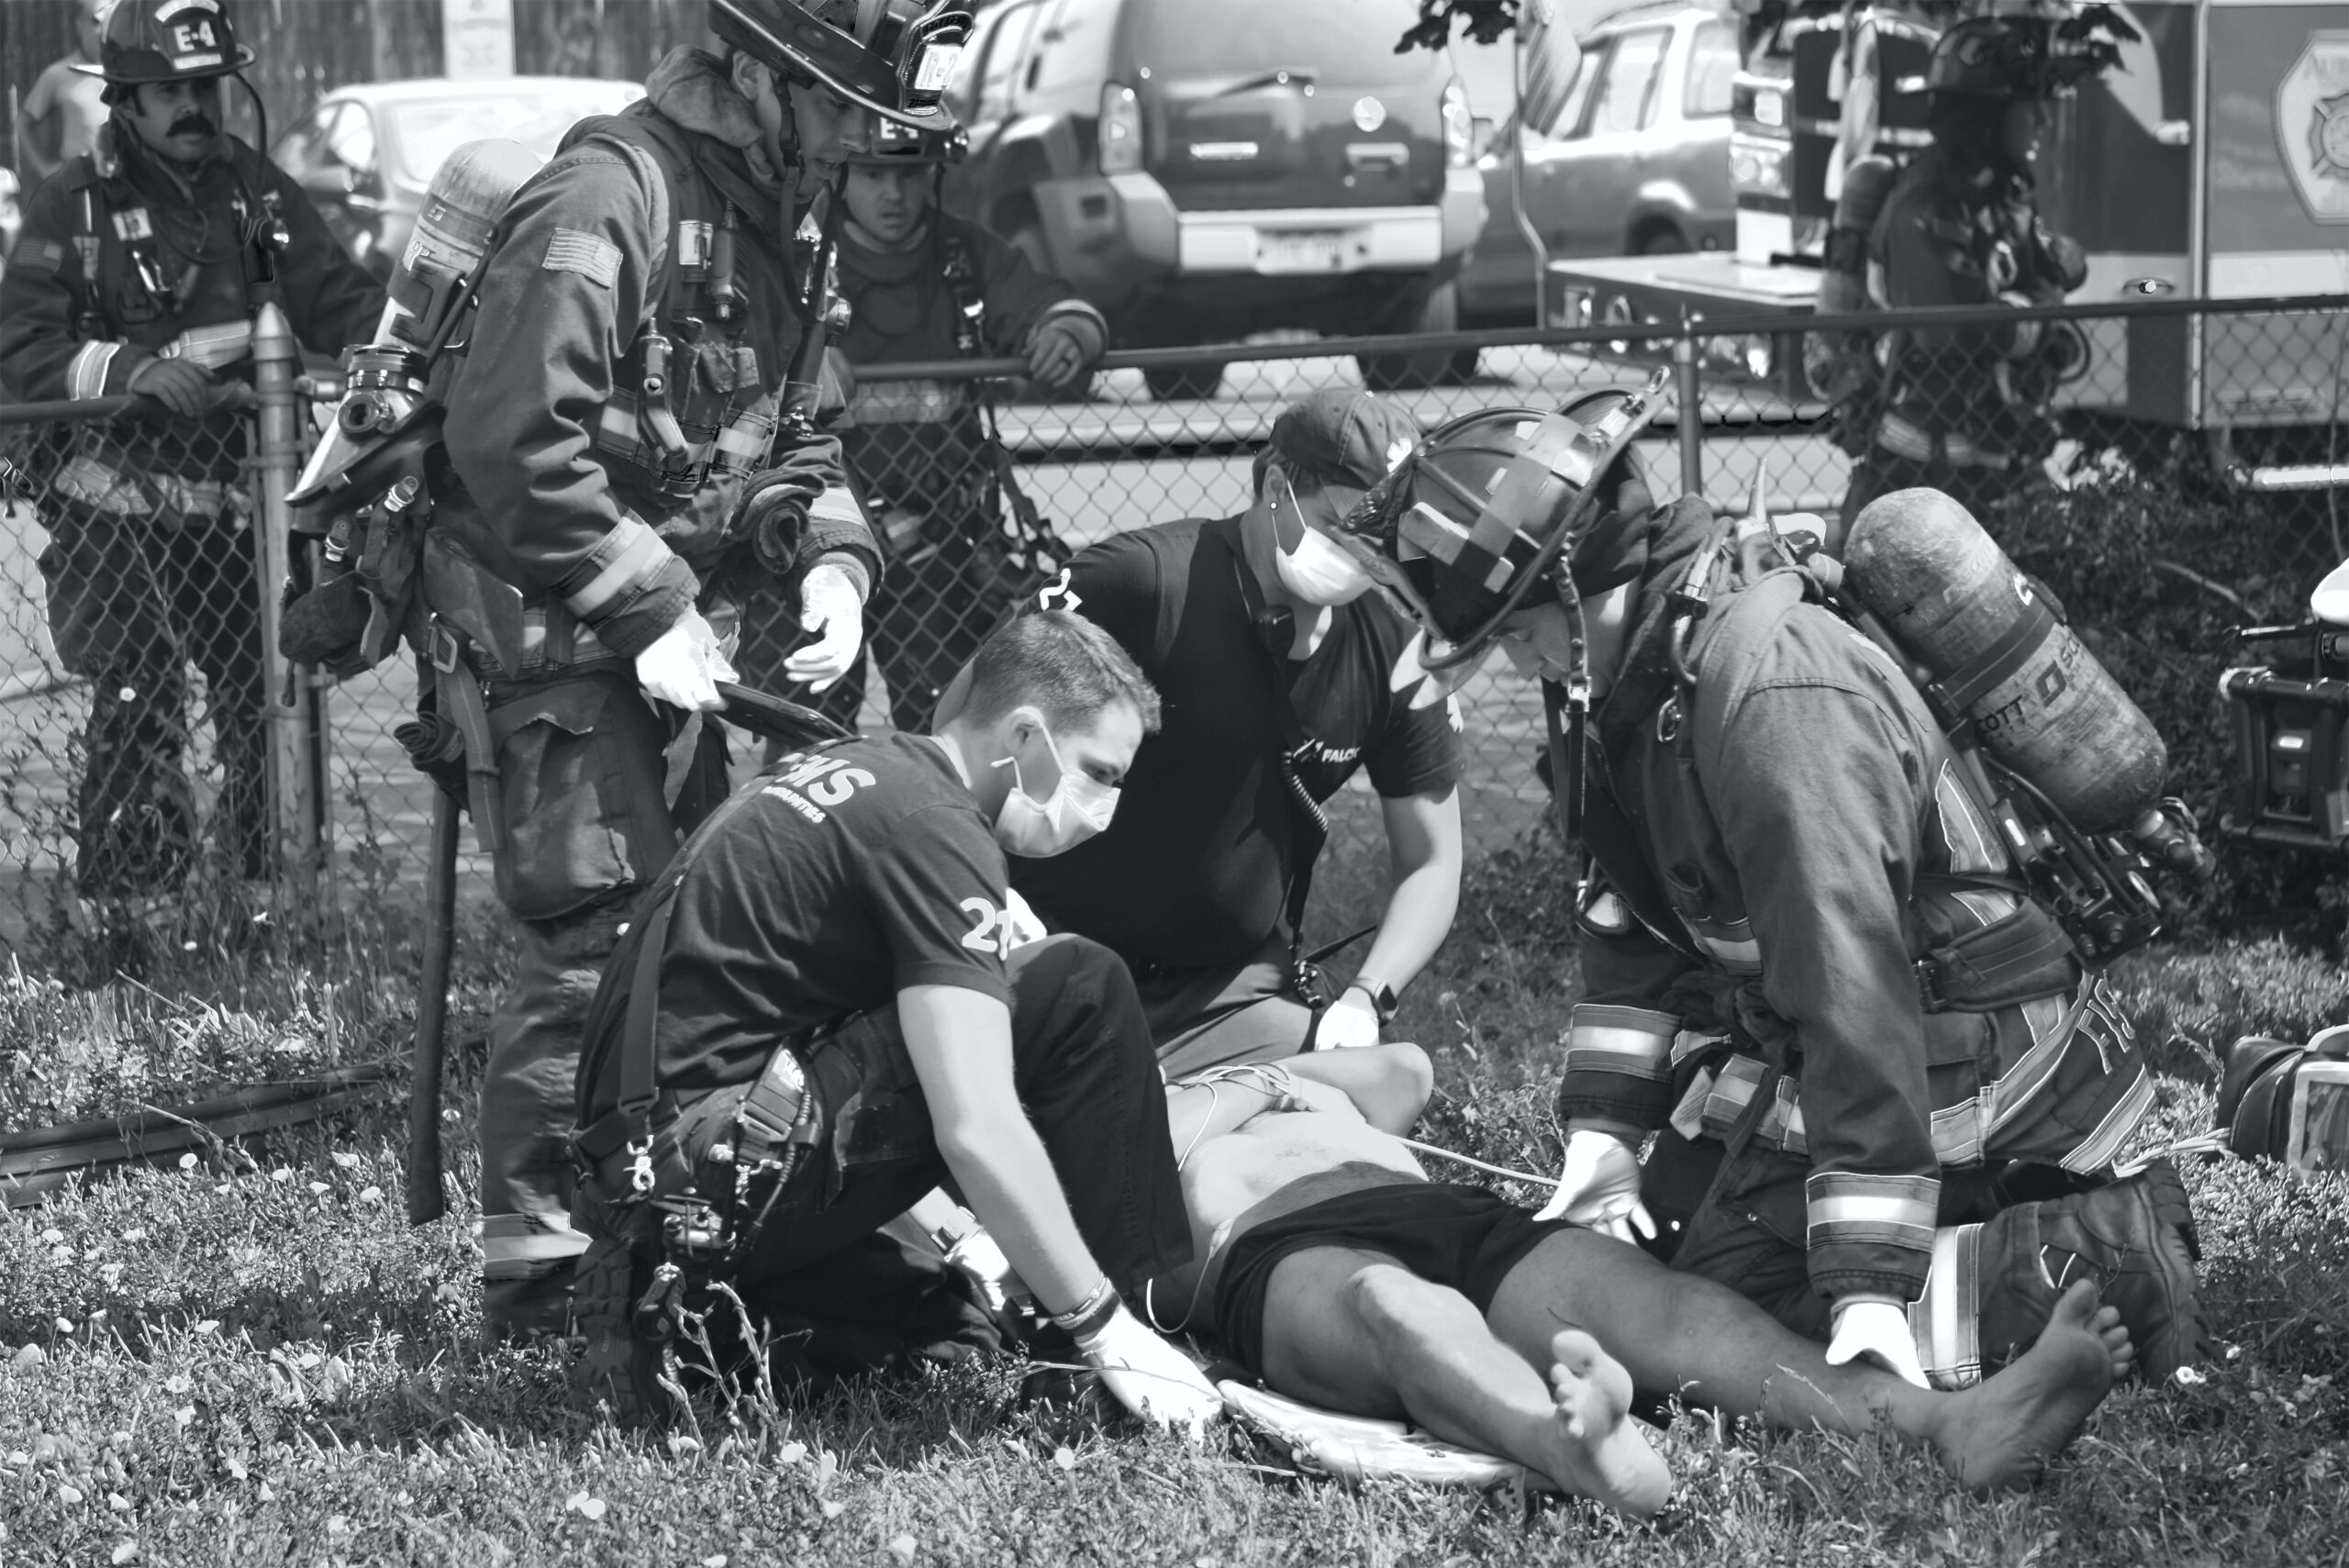 EMS and FIRE working together to save a patient